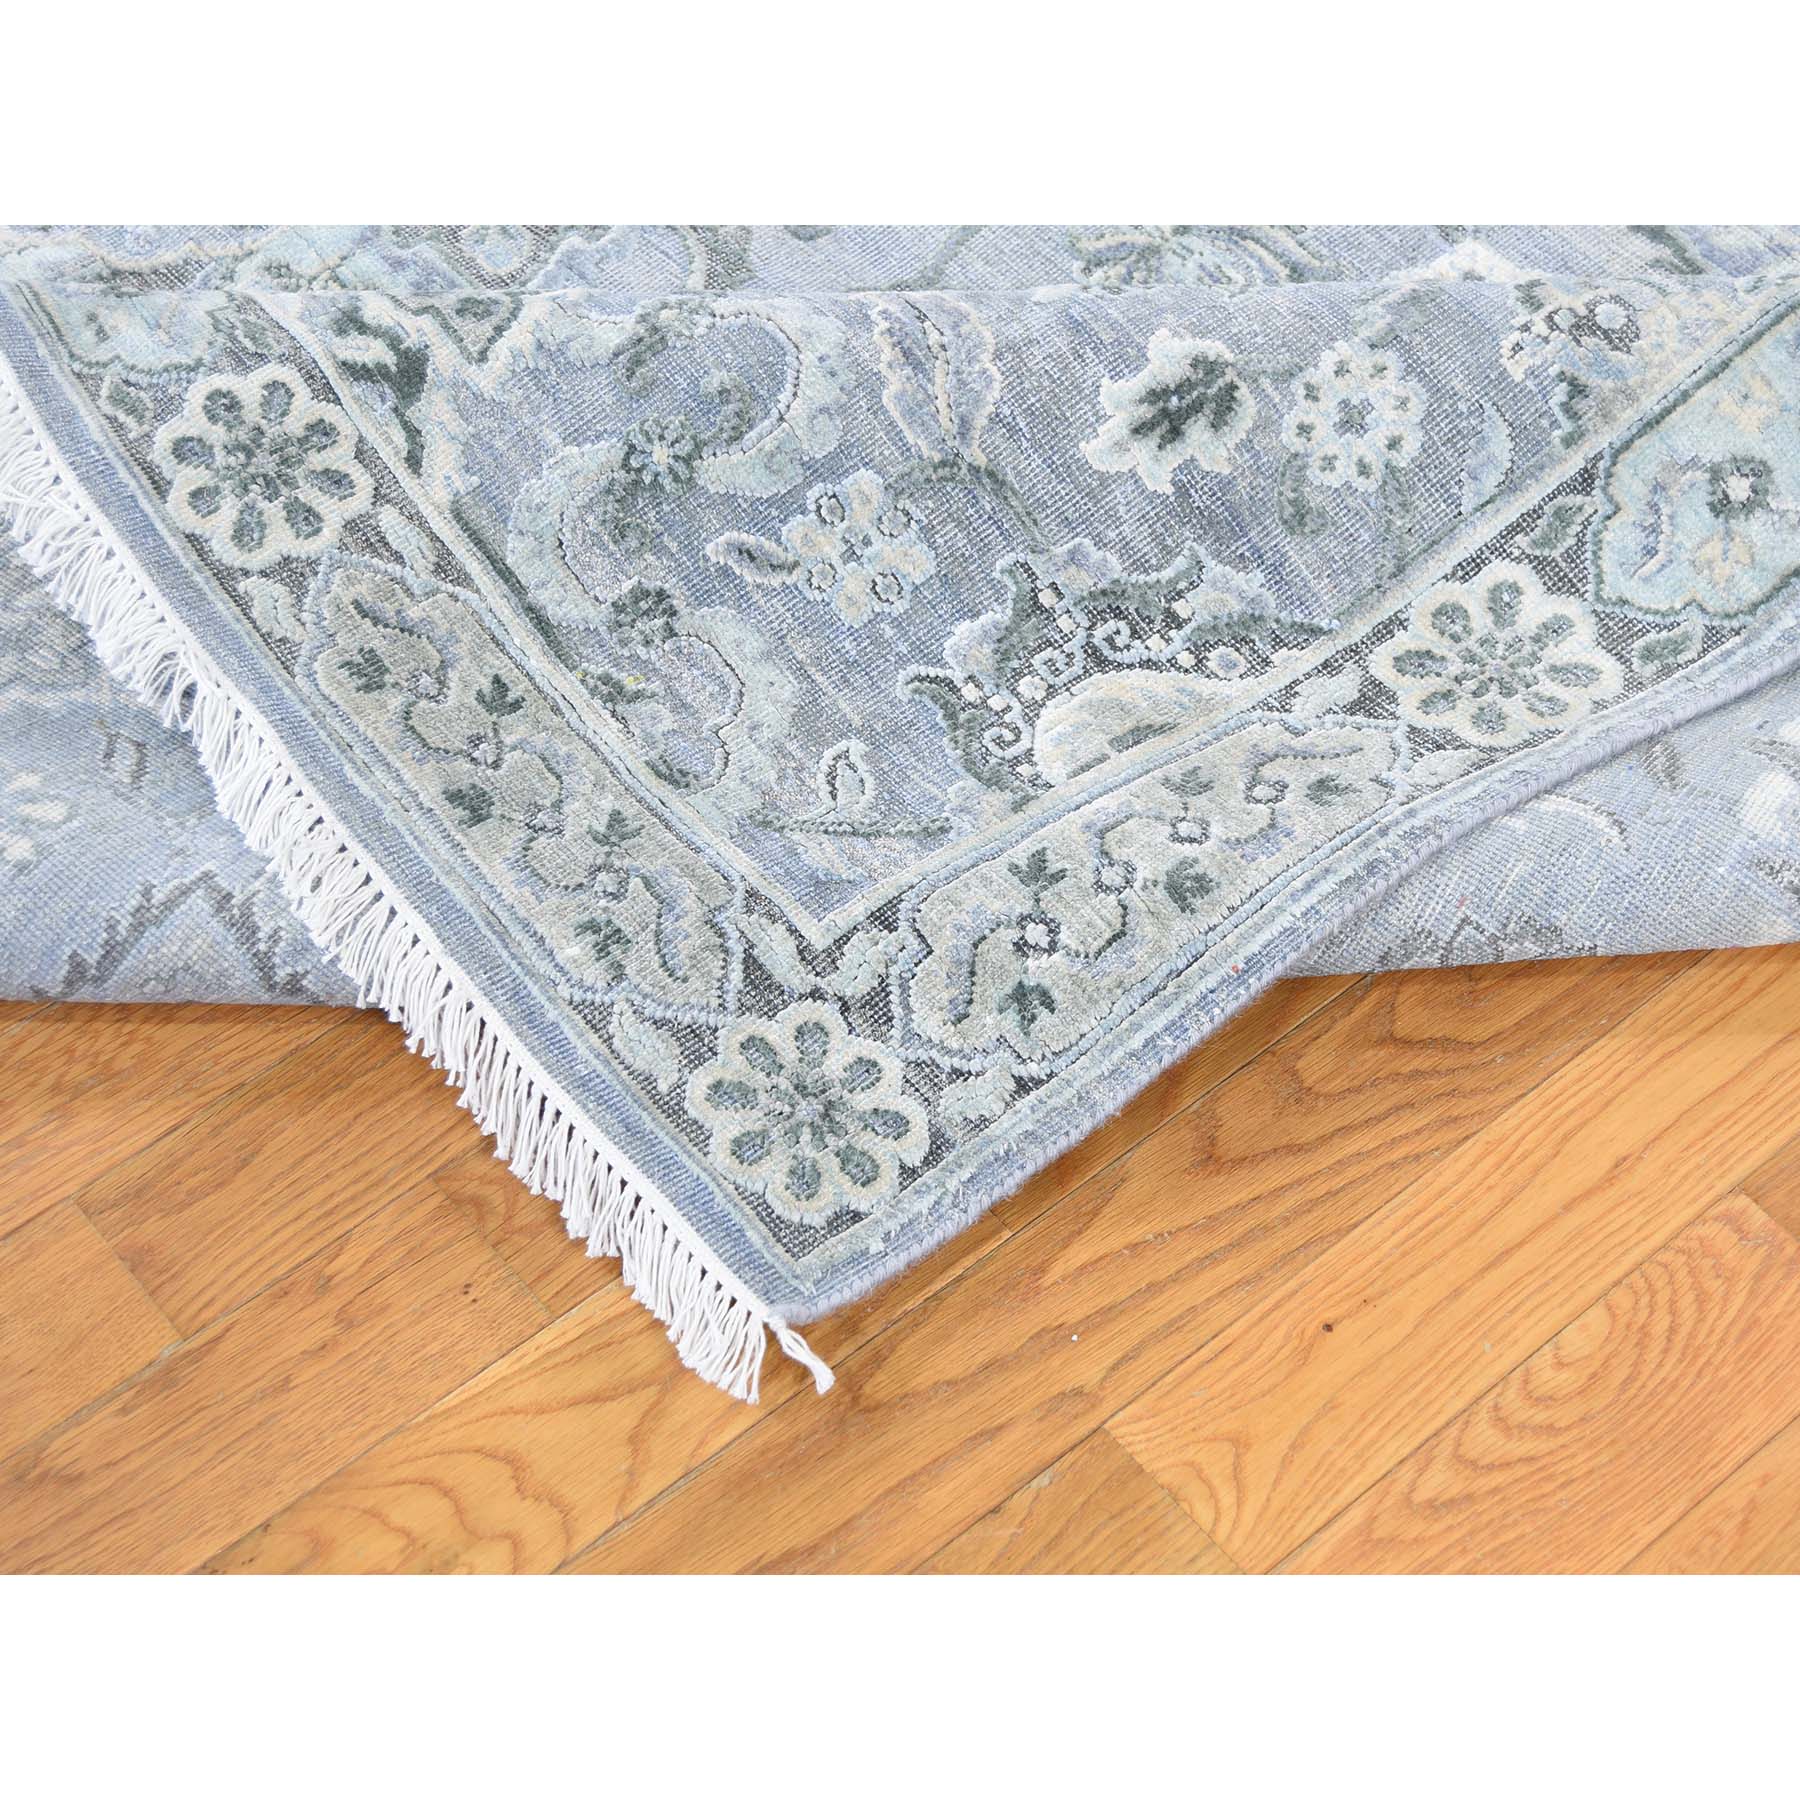 9-x12- Tone on Tone Oushak Silk With Textured Wool Hand-Knotted Oriental Rug 